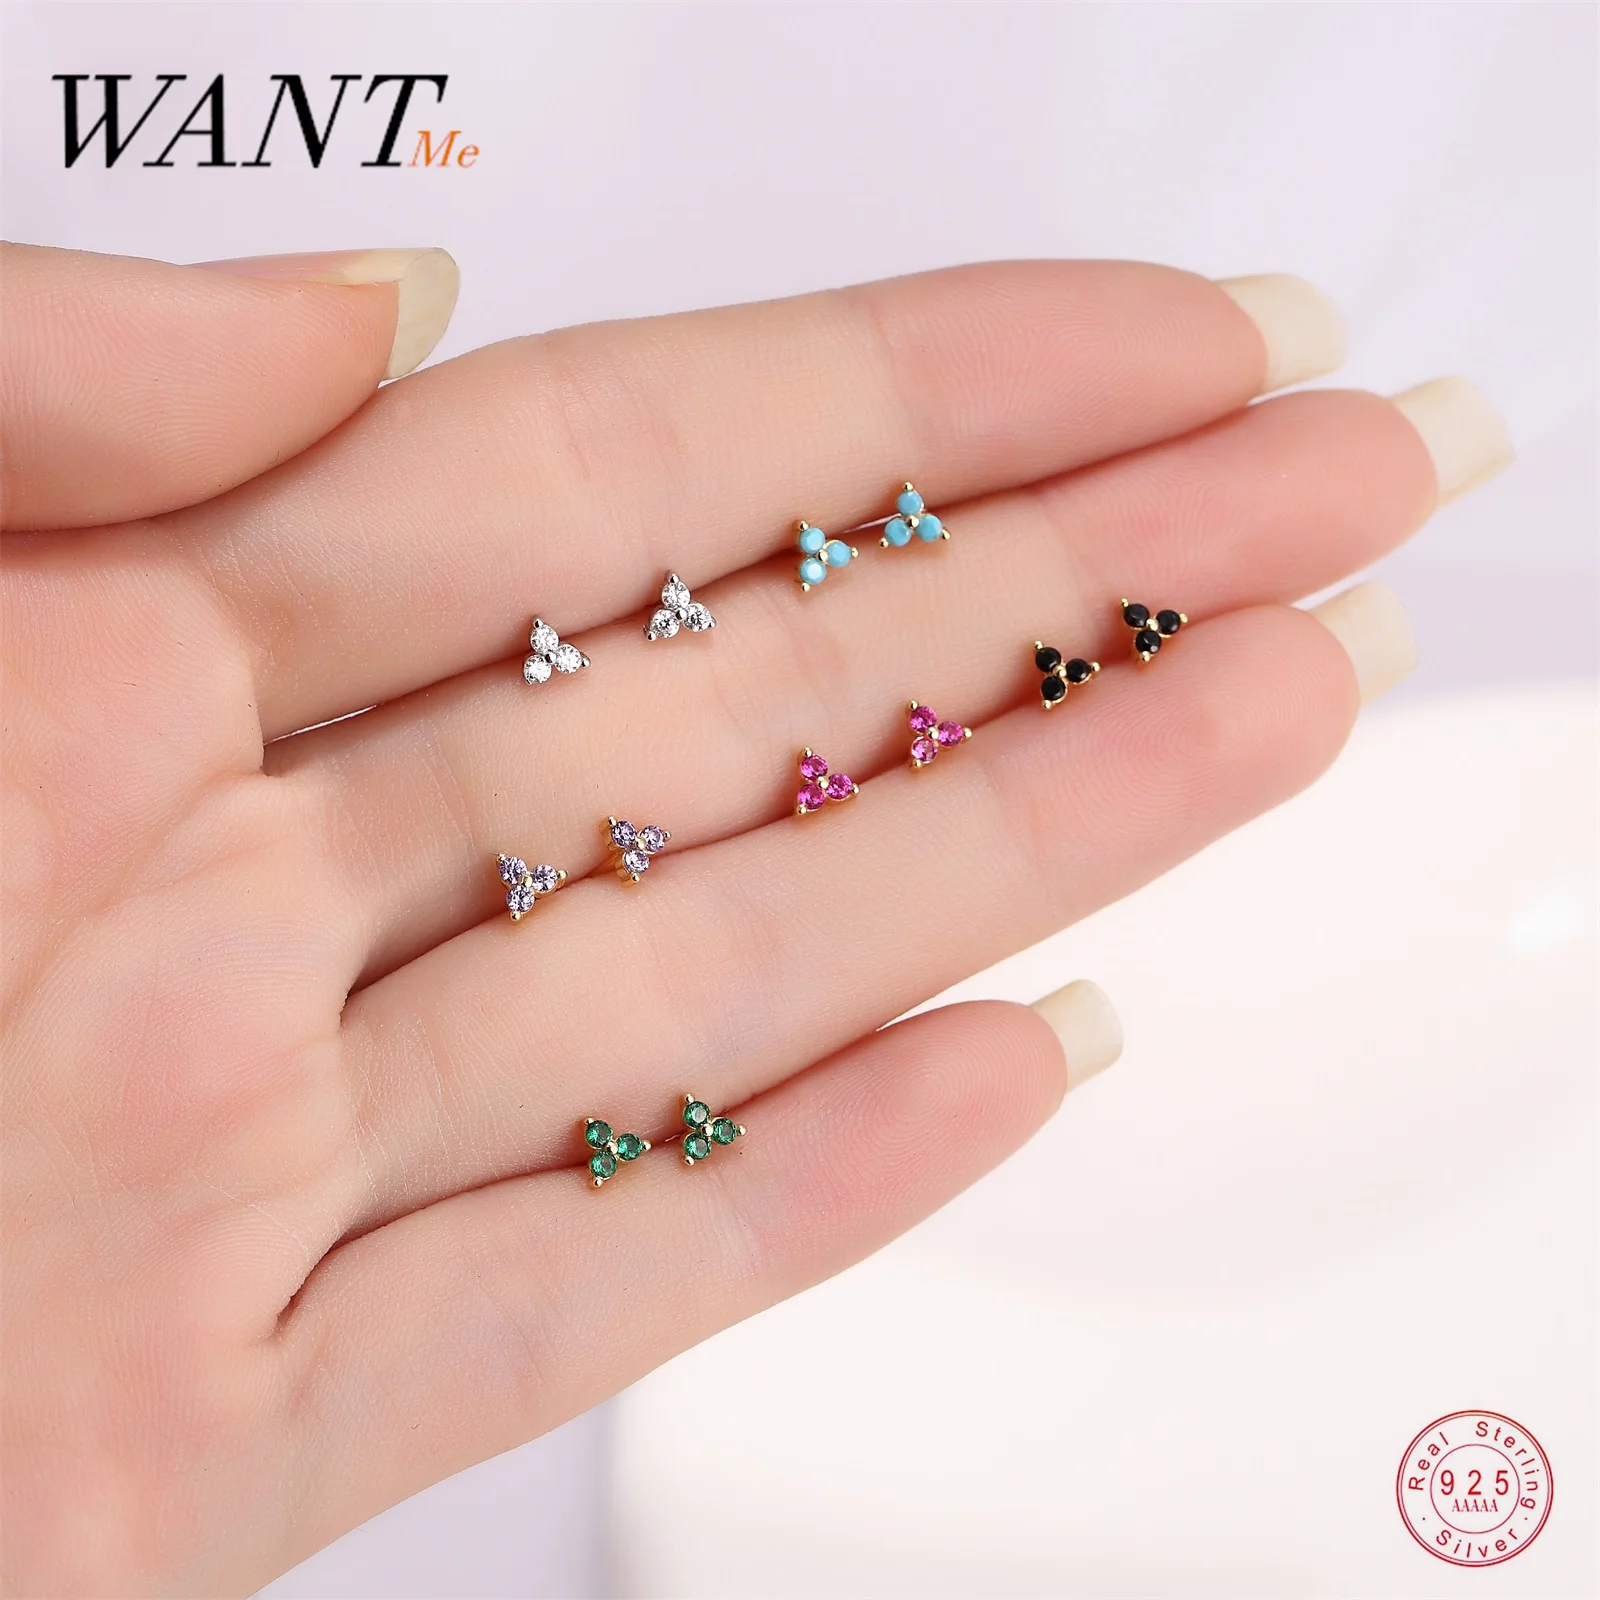 

WANTME 925 Sterling Silver Trend Korean Color Zircon Clover Flower Small Stud Earrings for Women Teen Romantic Party Jewelry